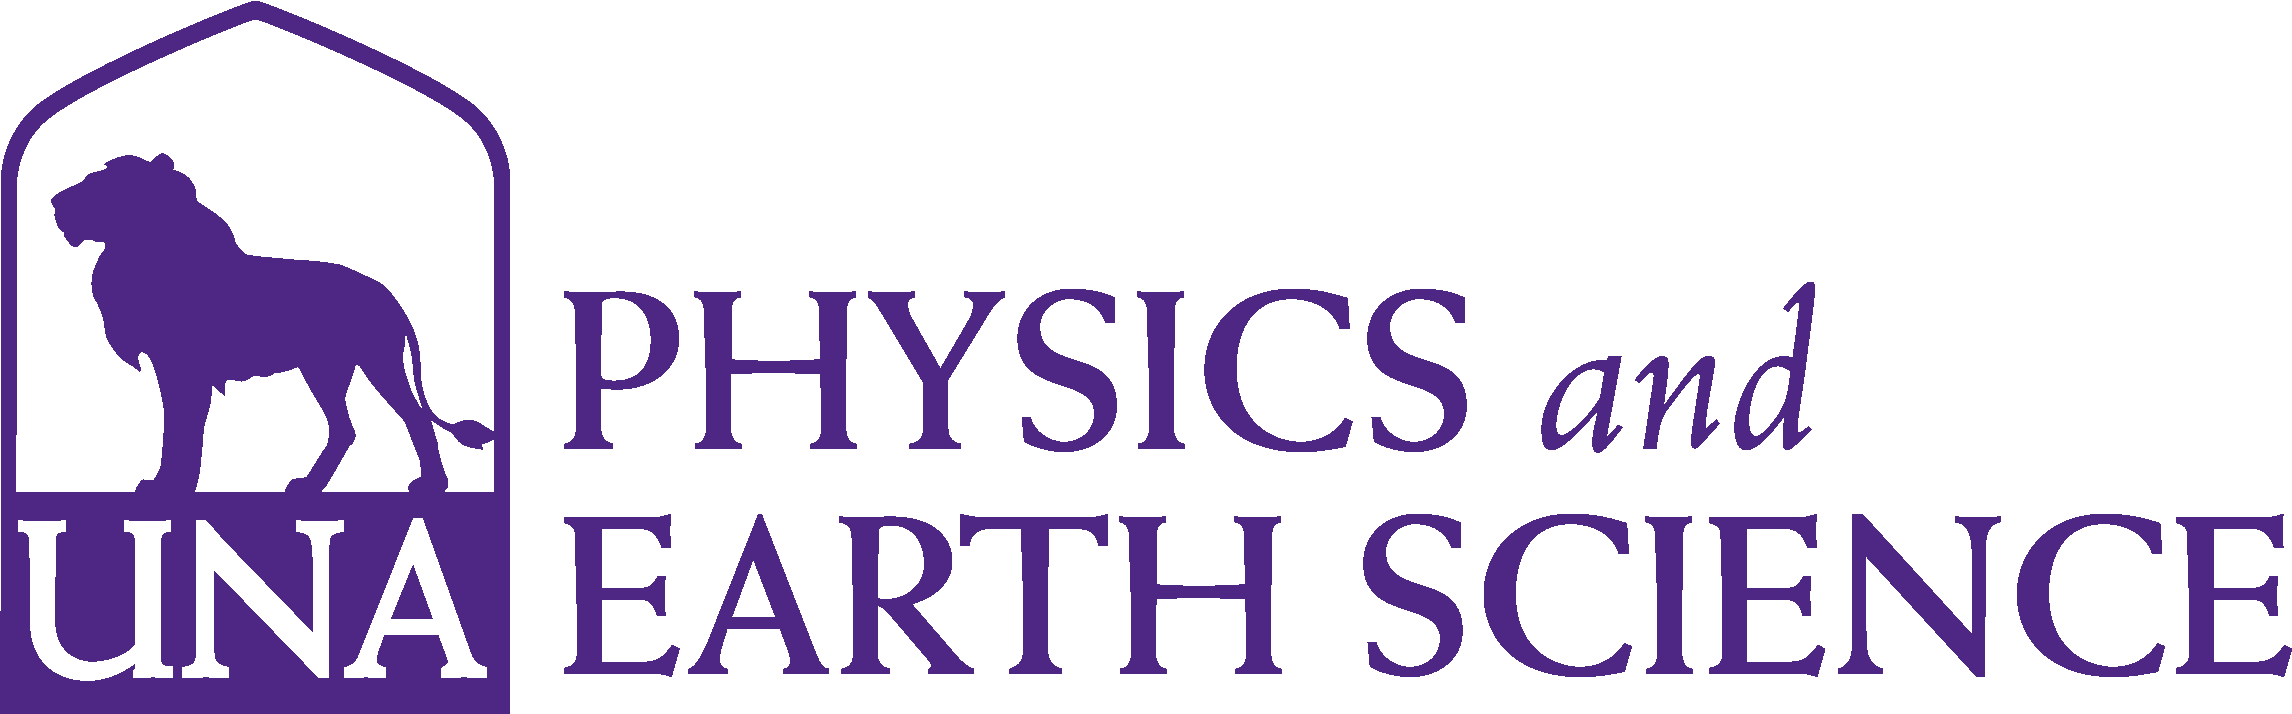 Physics and Earth Science logo 3